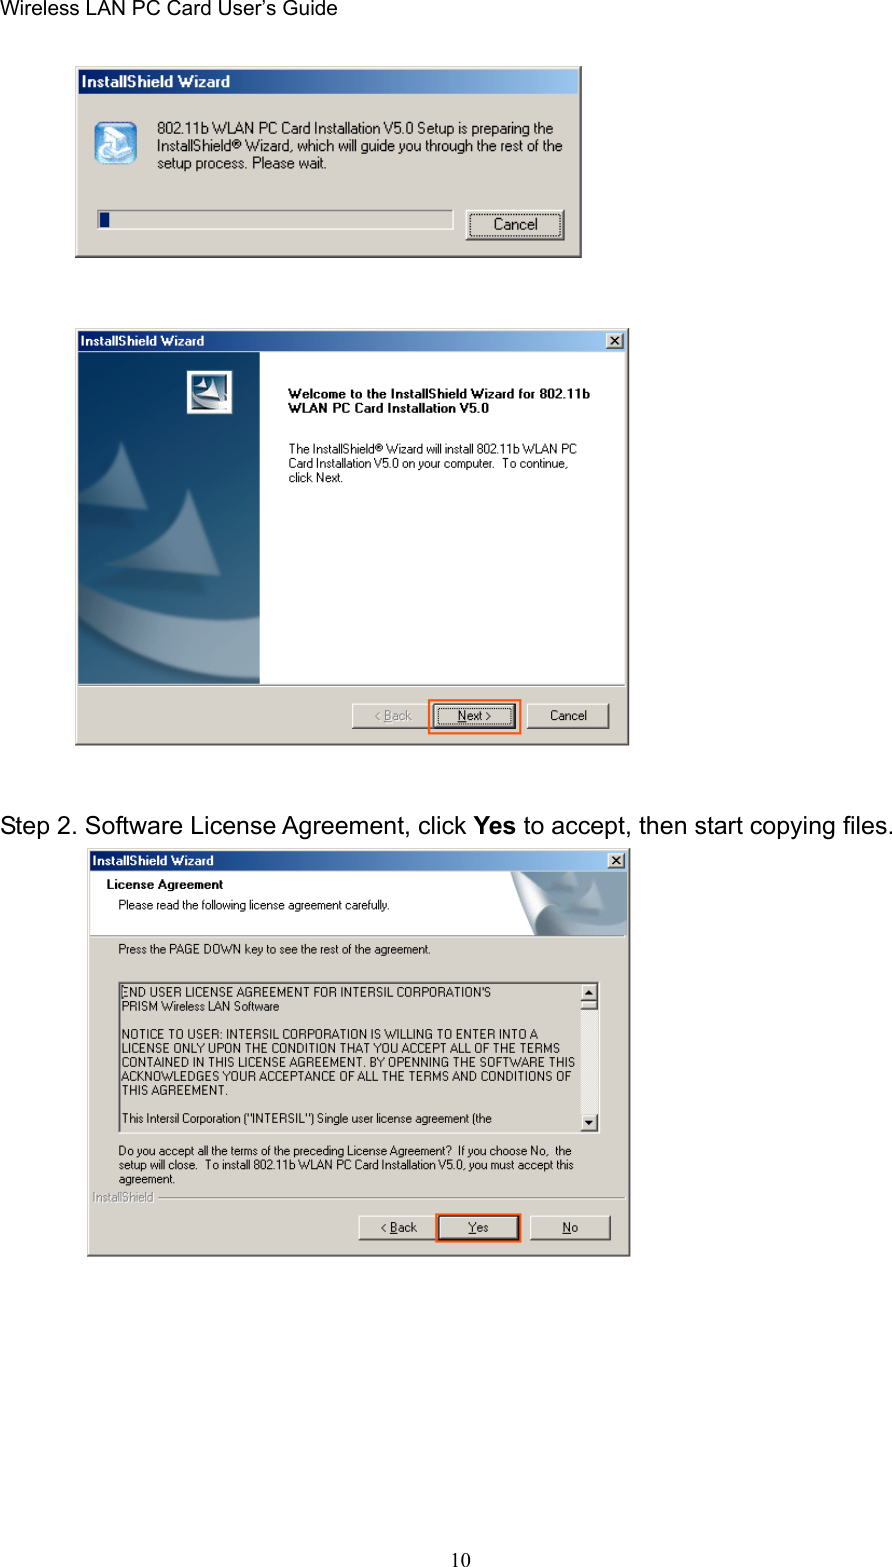 Wireless LAN PC Card User’s Guide10Step 2. Software License Agreement, click Yes to accept, then start copying files.      